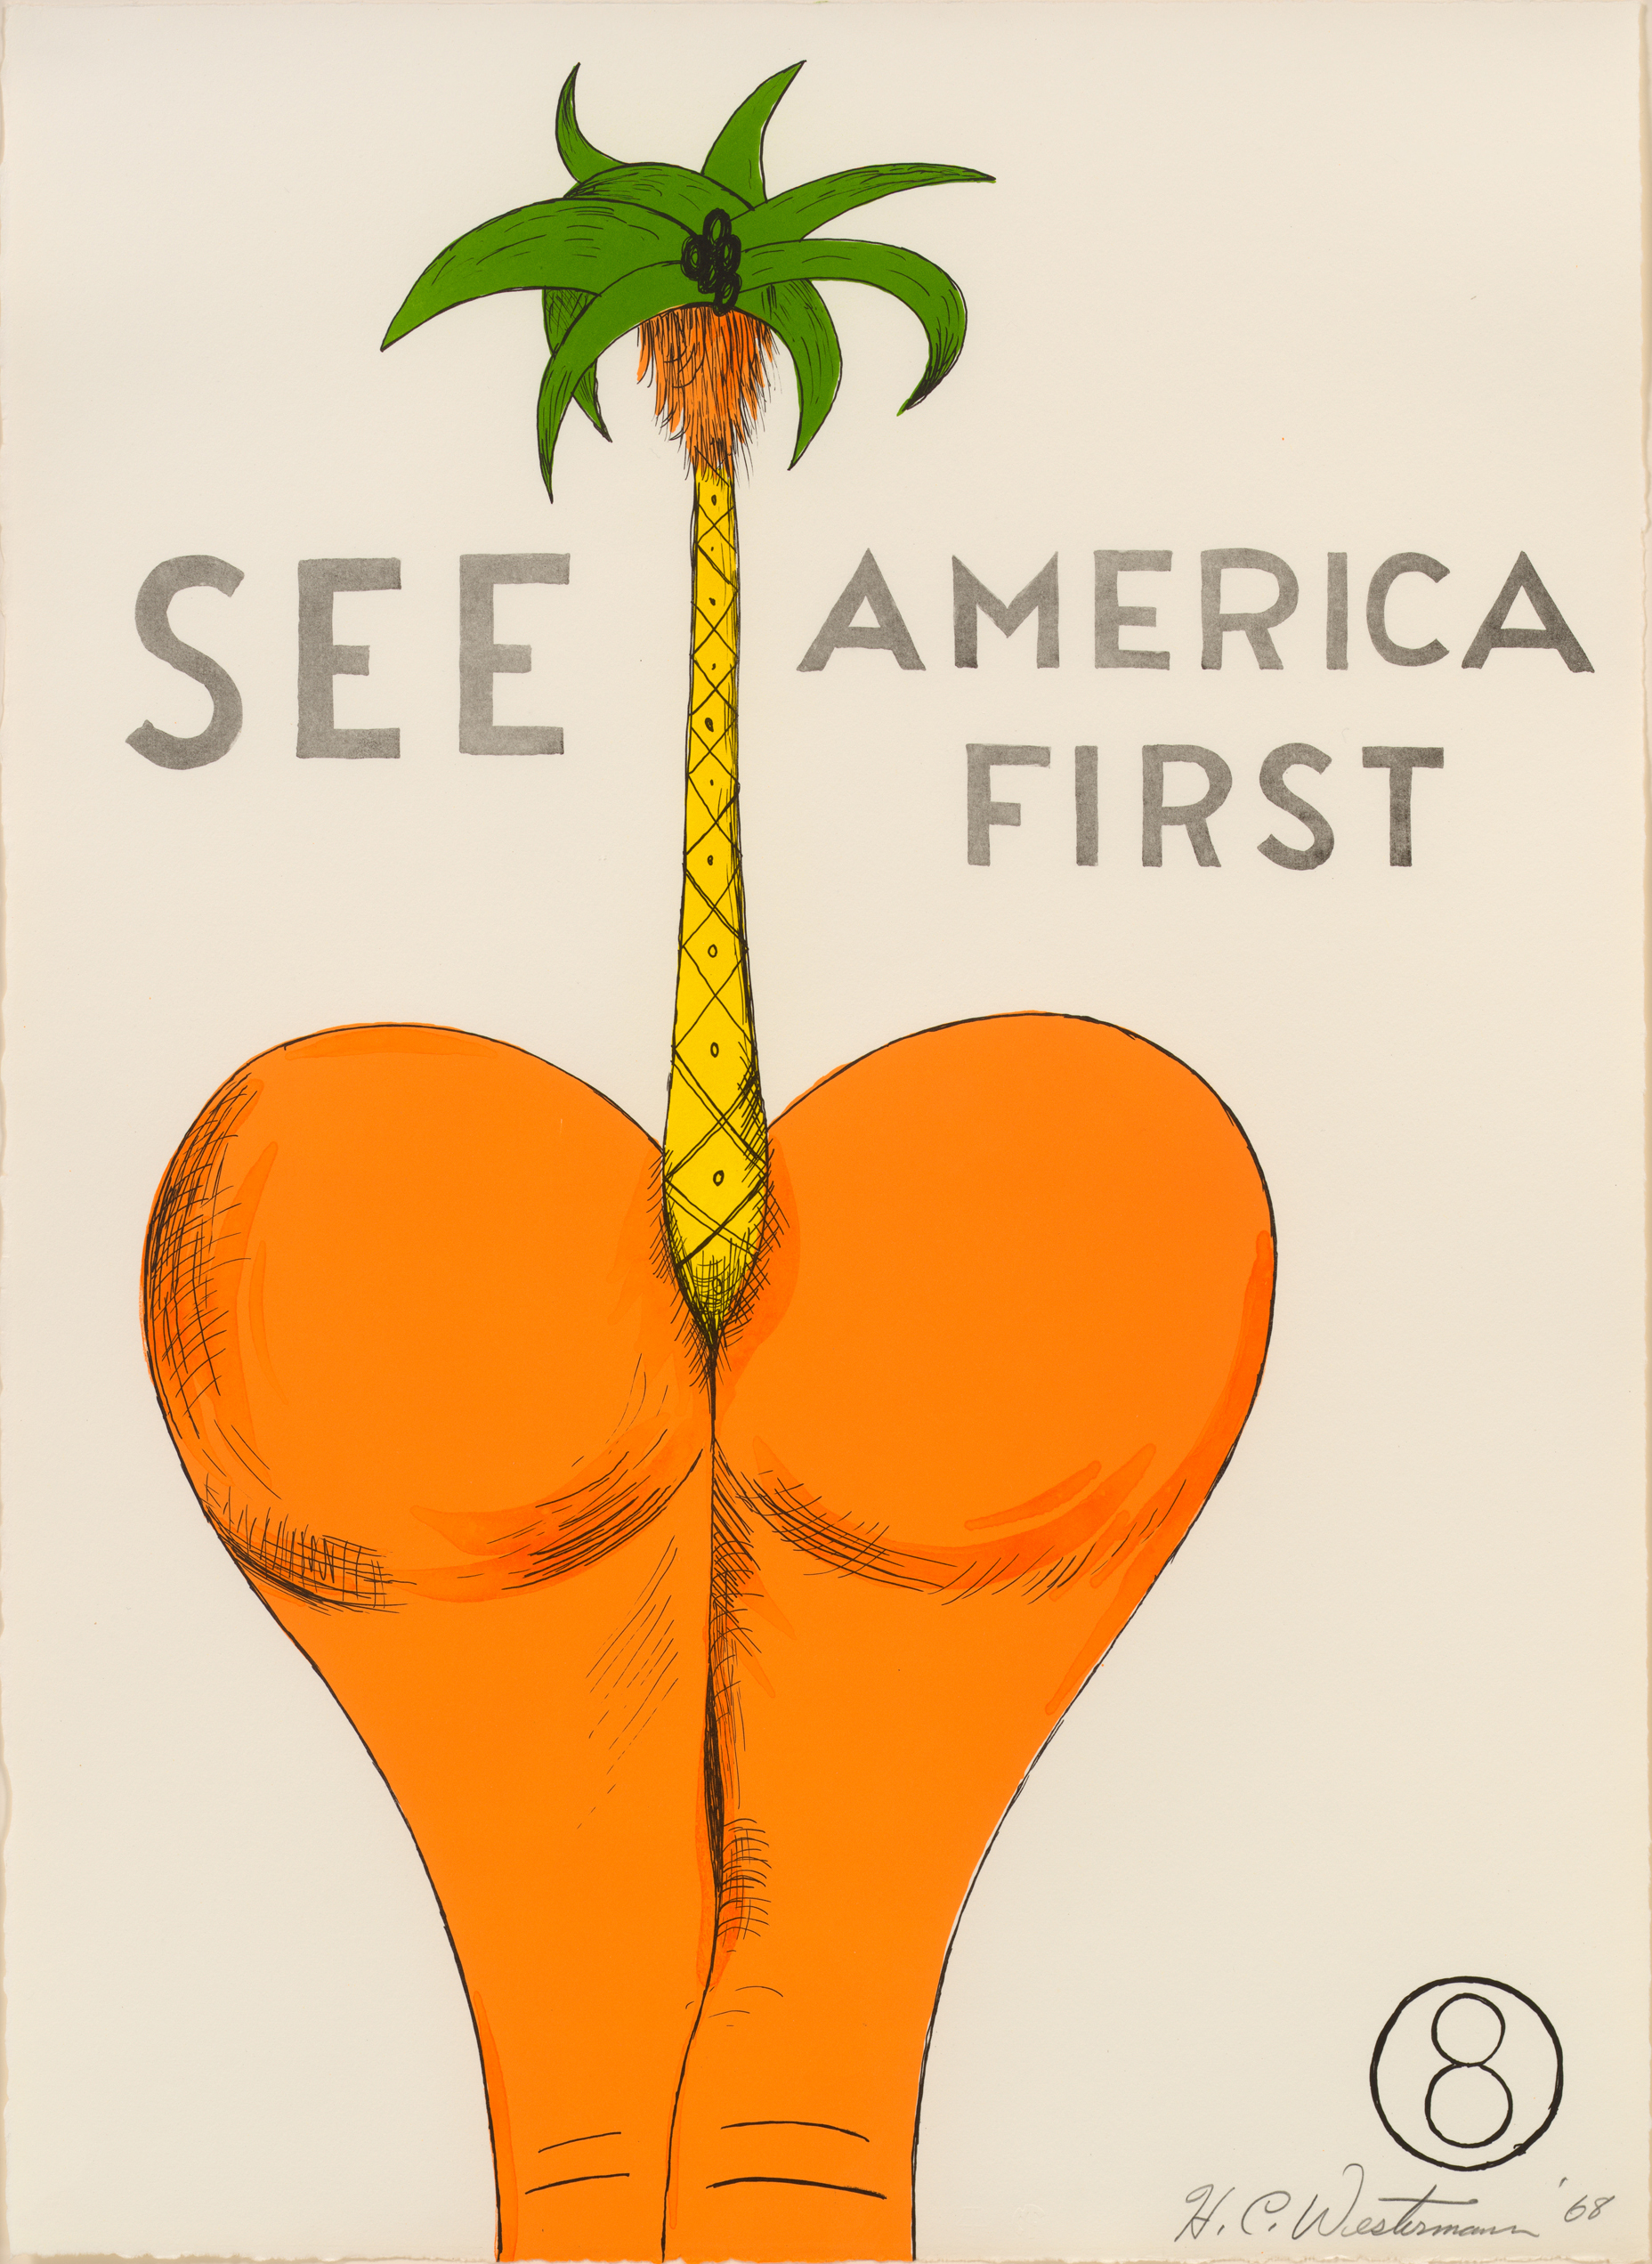 See America First by H.C. Westermann